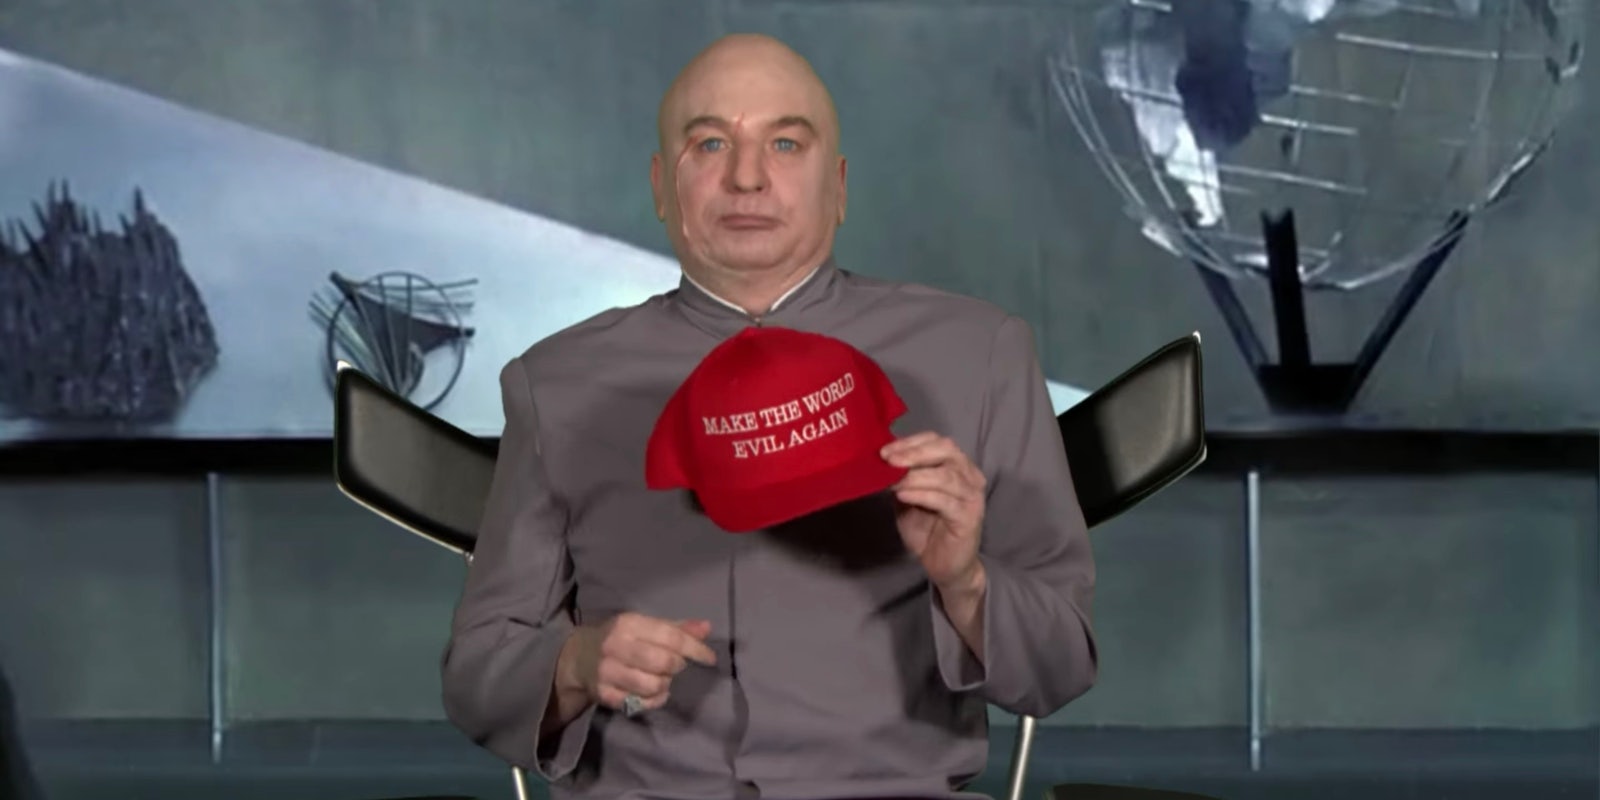 Dr. Evil Tells Fallon He Was 'Fired' From Trump's Cabinet